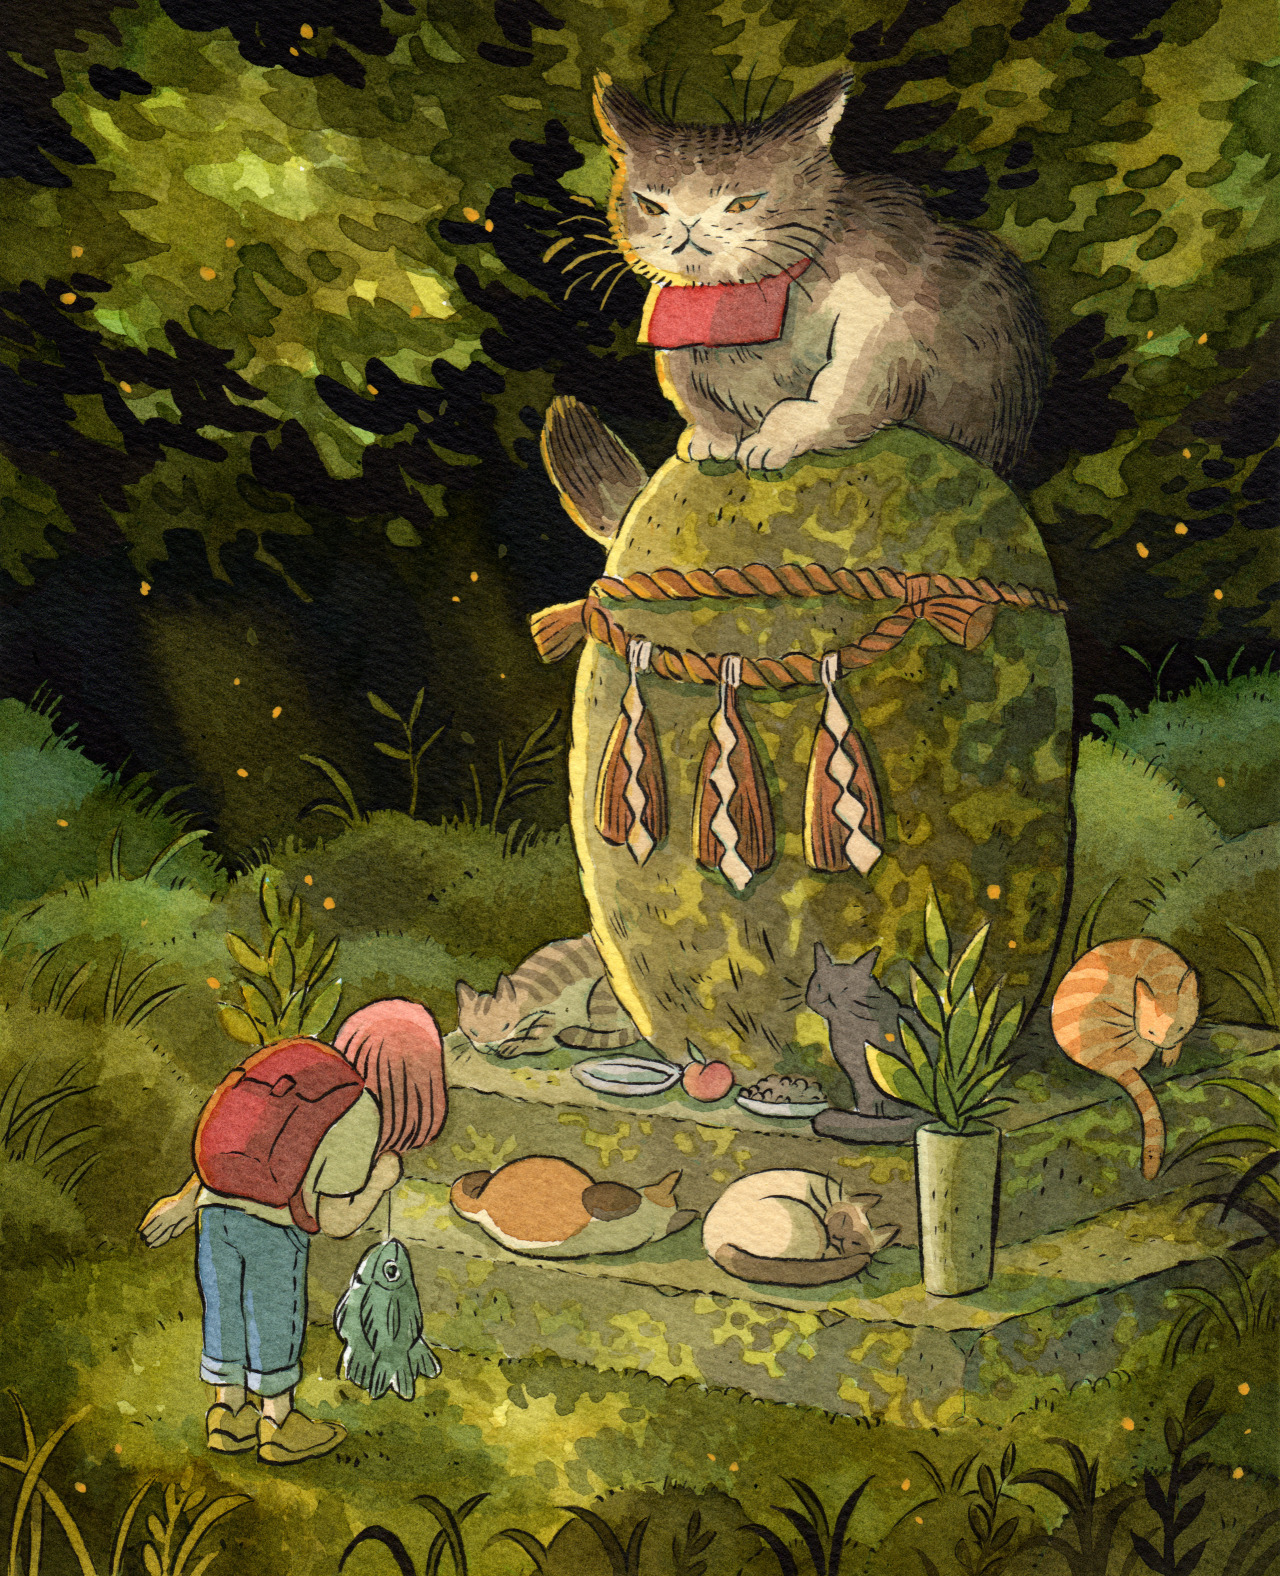 heikala:
“Offering 🐟🐈
This illustration is available as a print at https://heikala.com/ ✨
”